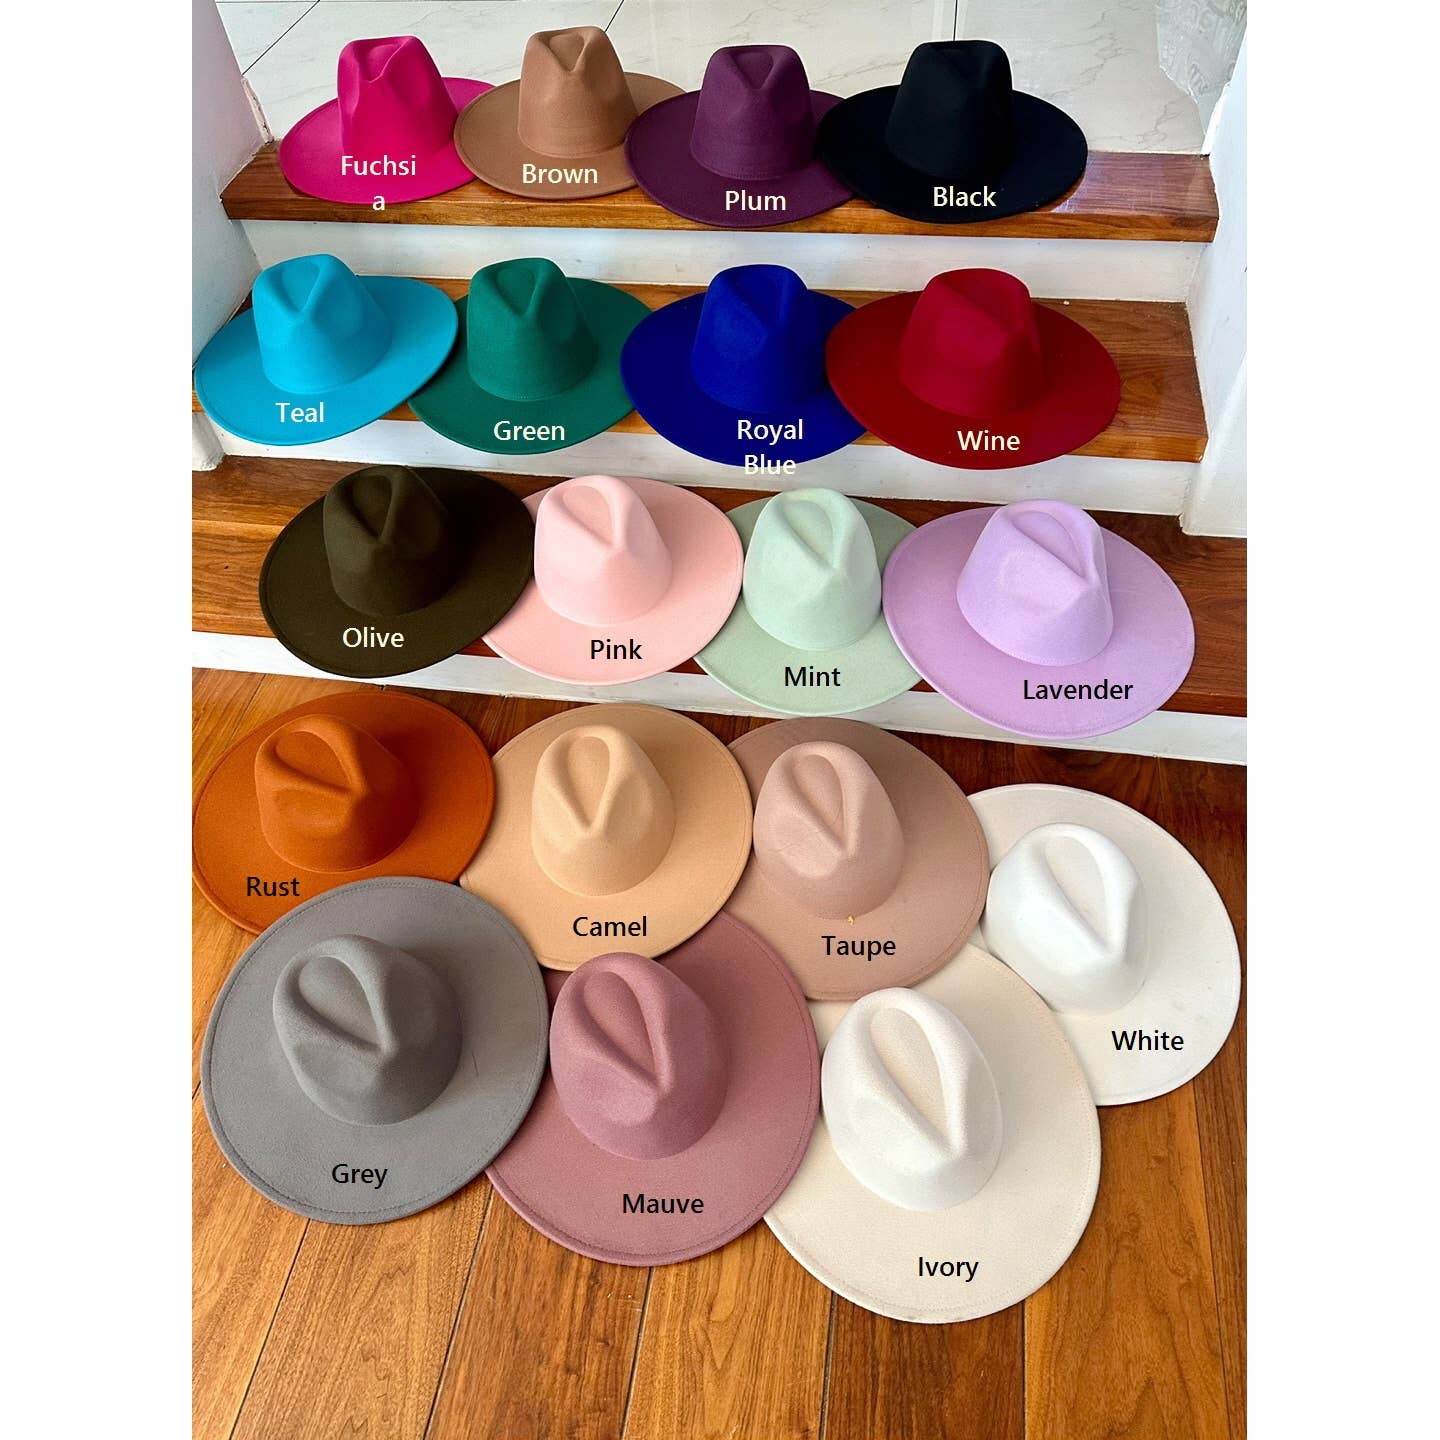 Purchase Wholesale wide brim hat. Free Returns & Net 60 Terms on Faire